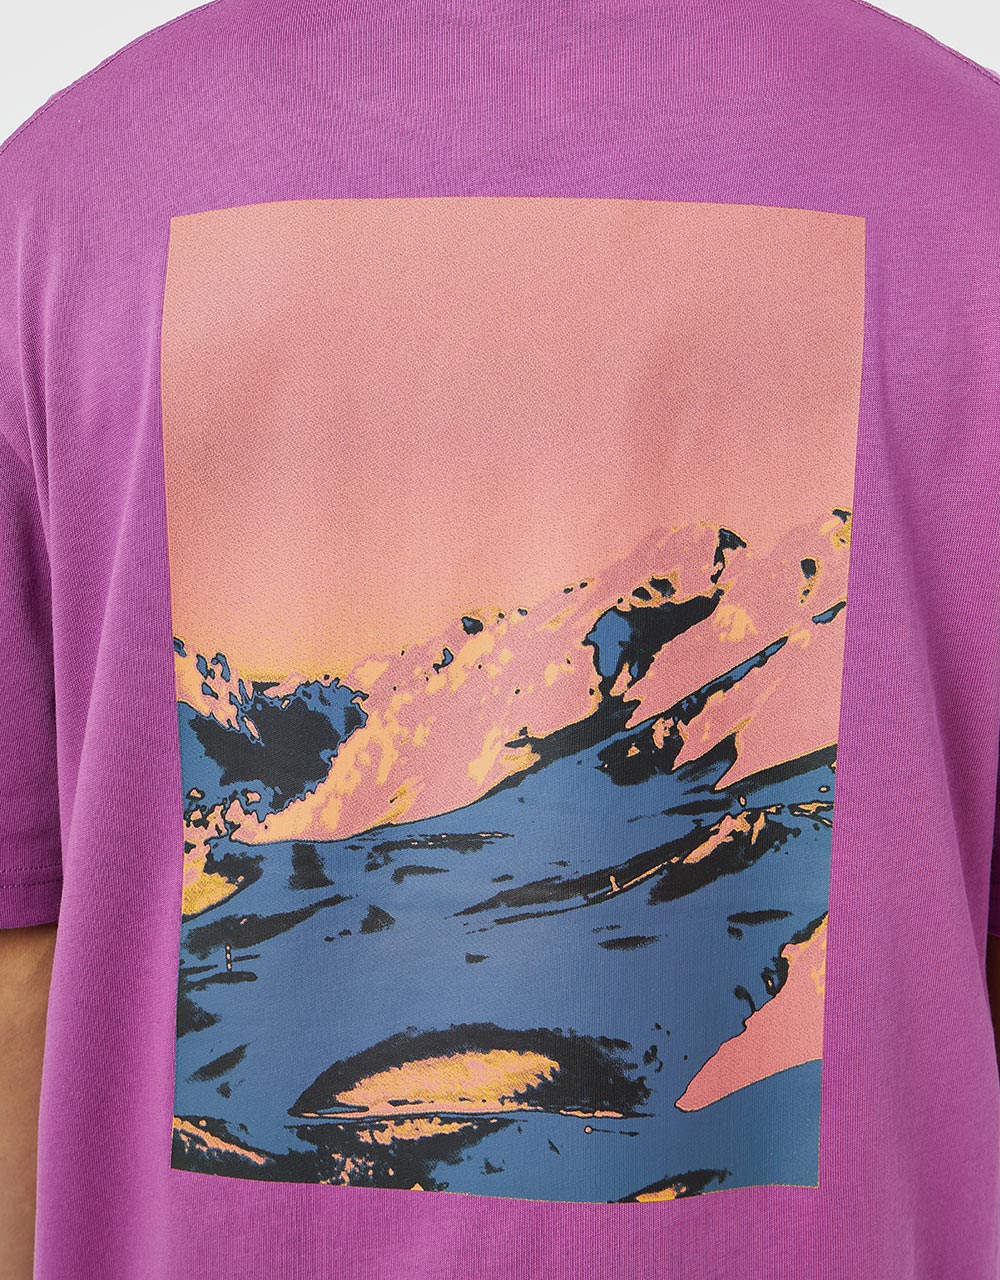 The North Face Heavy Weight Range T-Shirt - Purple Cactus Flower